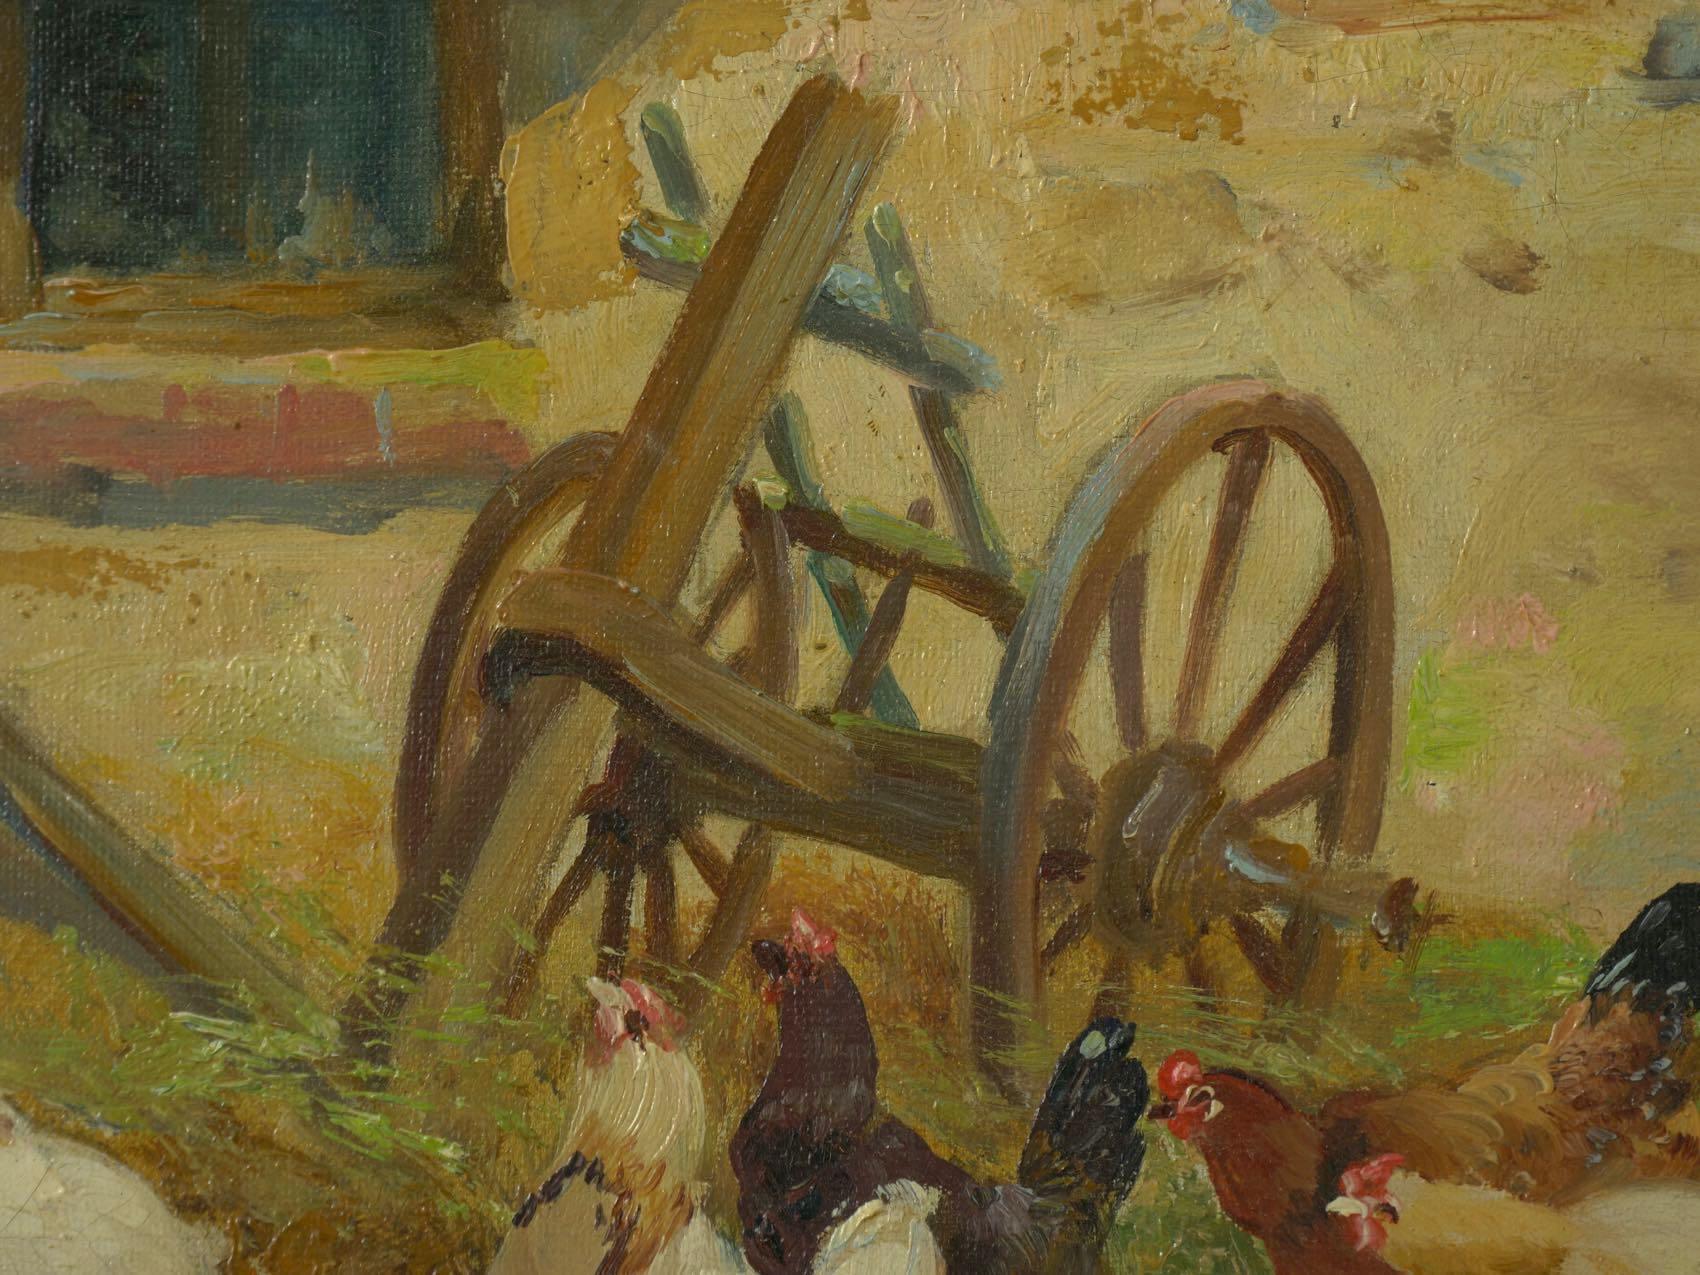 Barnyard Chickens Painting by Jacques van Coppenolle 2